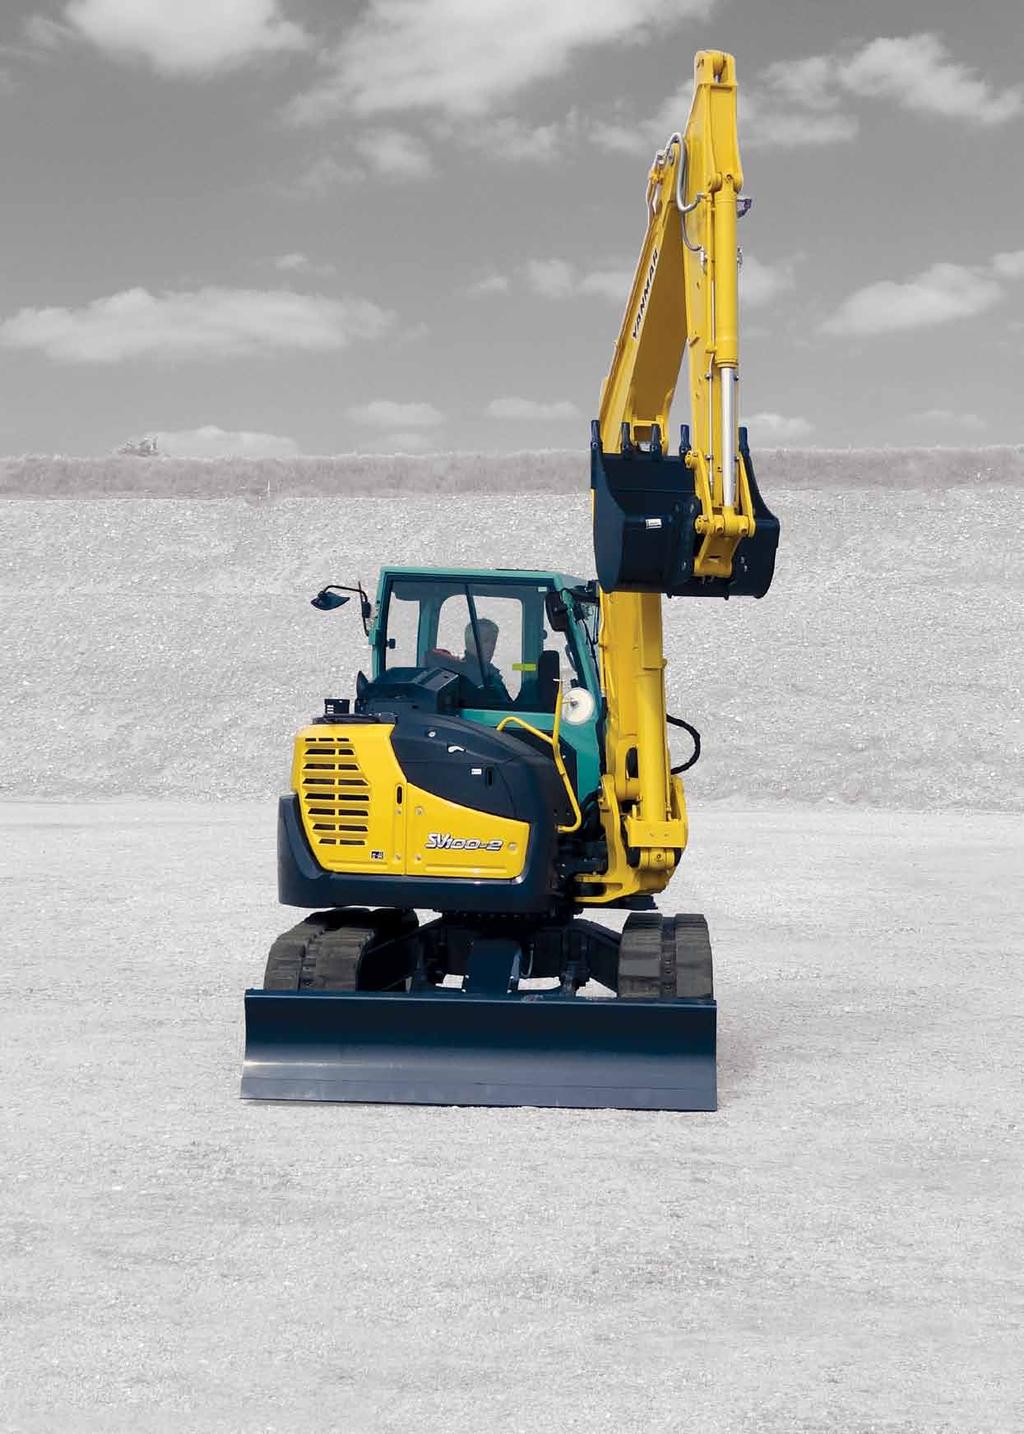 AN UNMATCHED COMBINATION OF COMPACTNESS AND PERFORMANCE Rear turning radius: 1330 mm Minimum